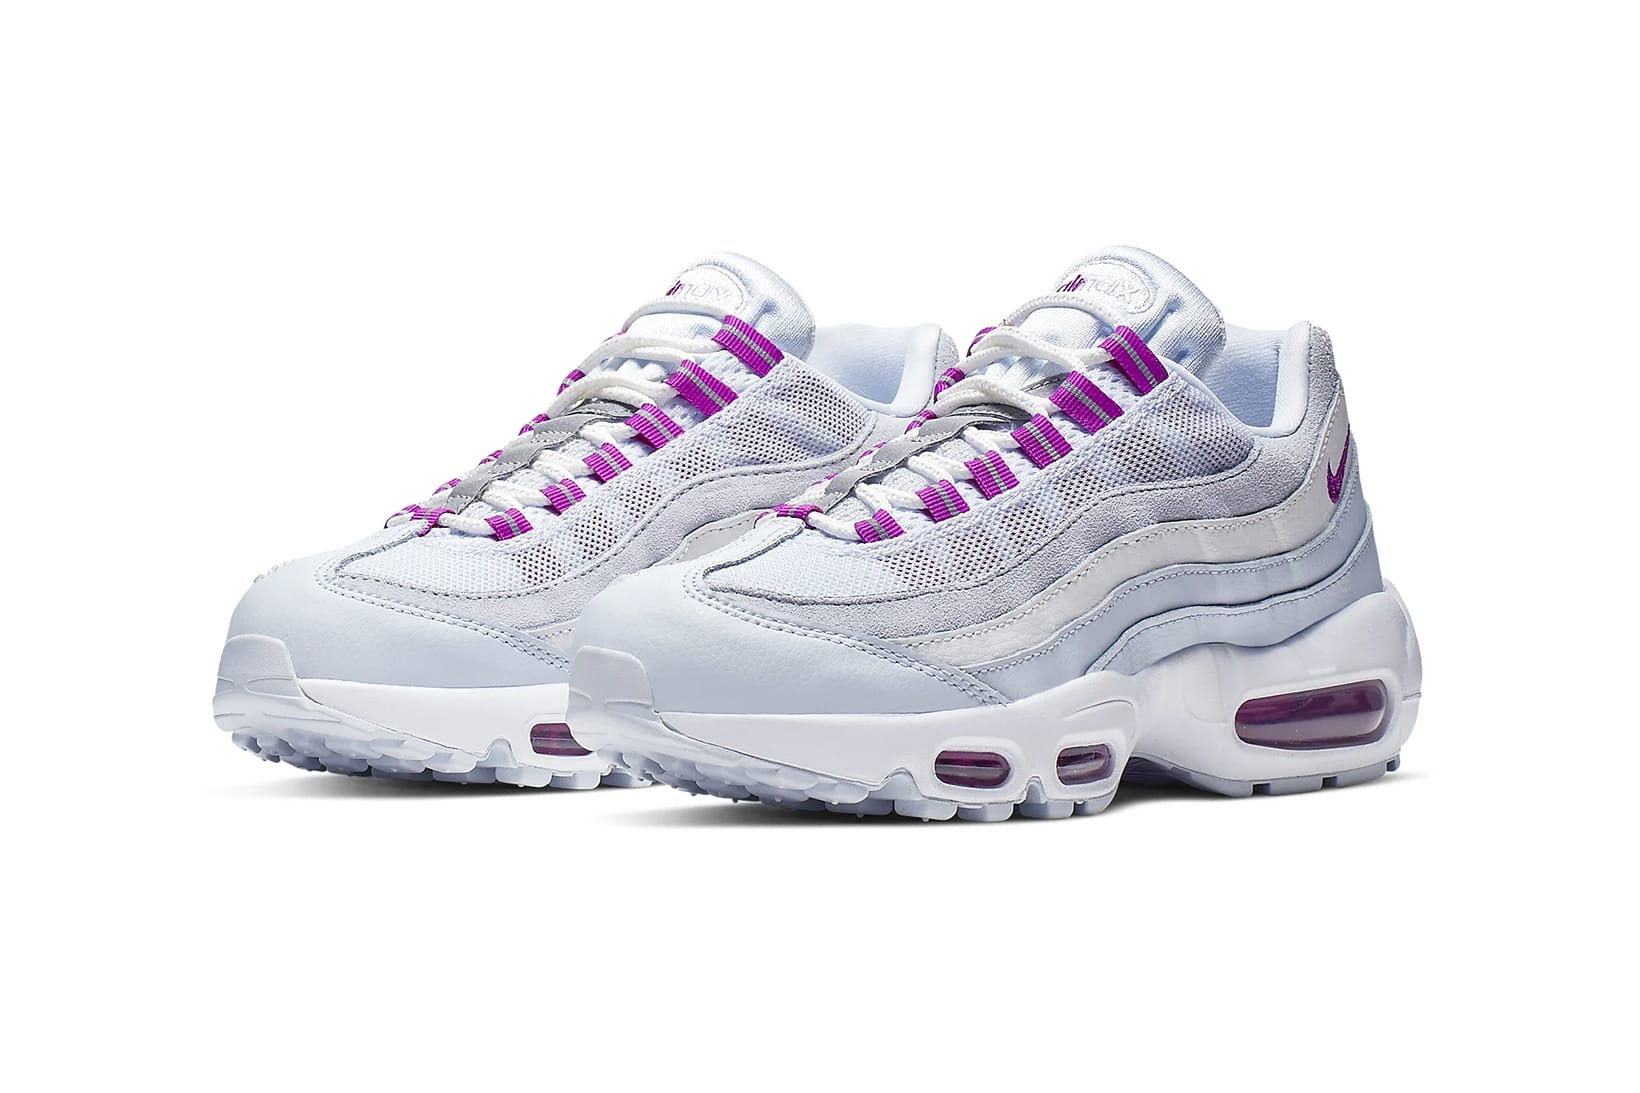 Air Max 95 in Two New Pastel Colorways 